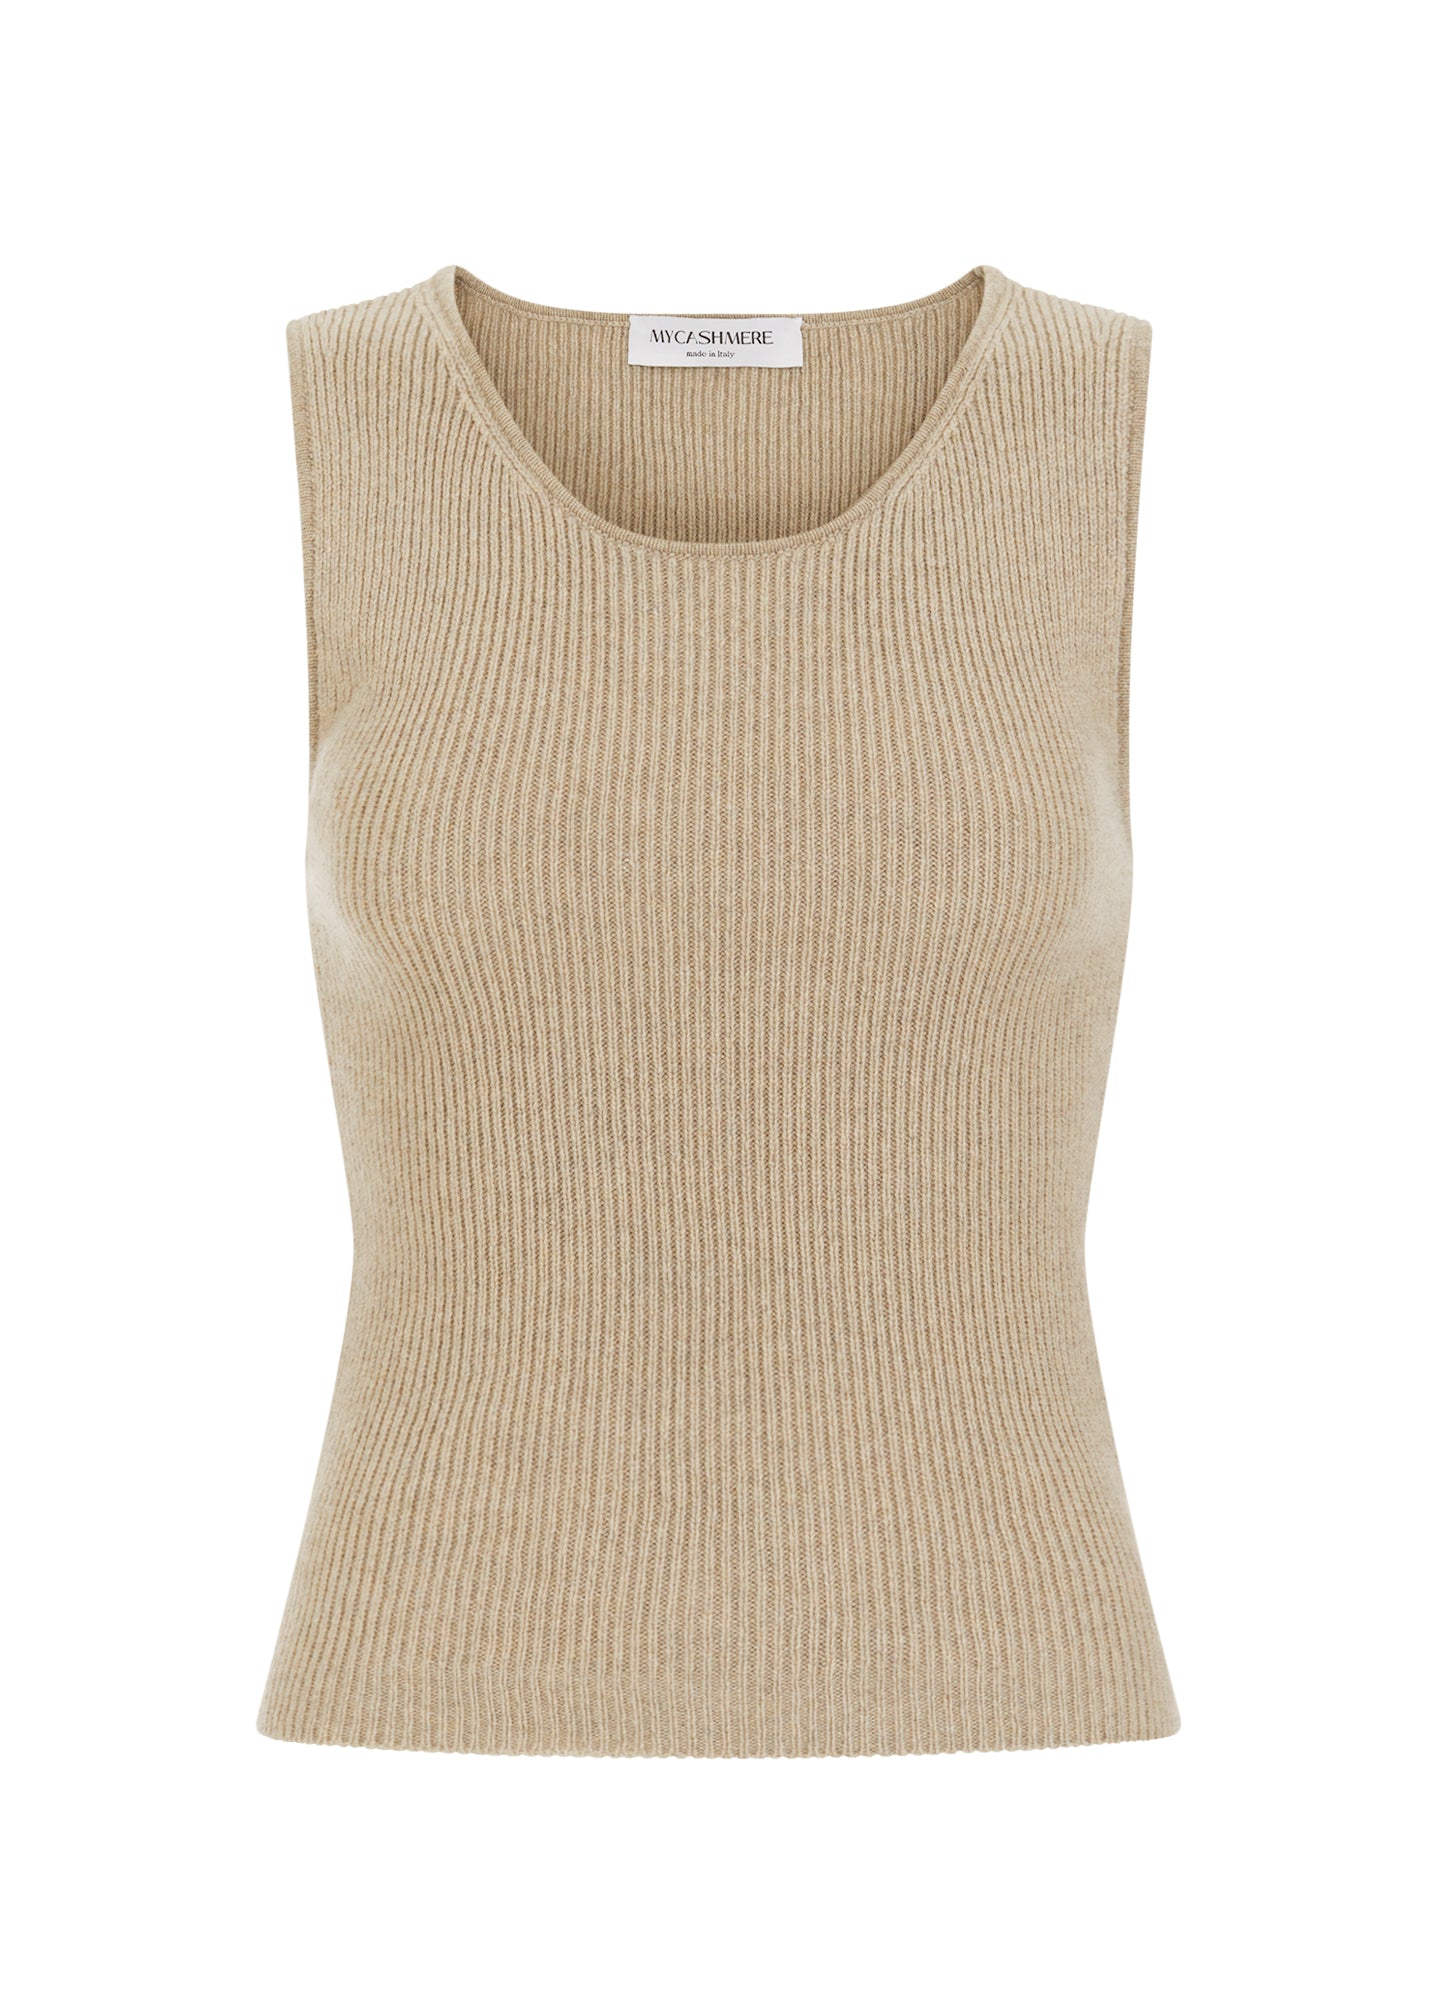 Women's cashmere tank top in sand